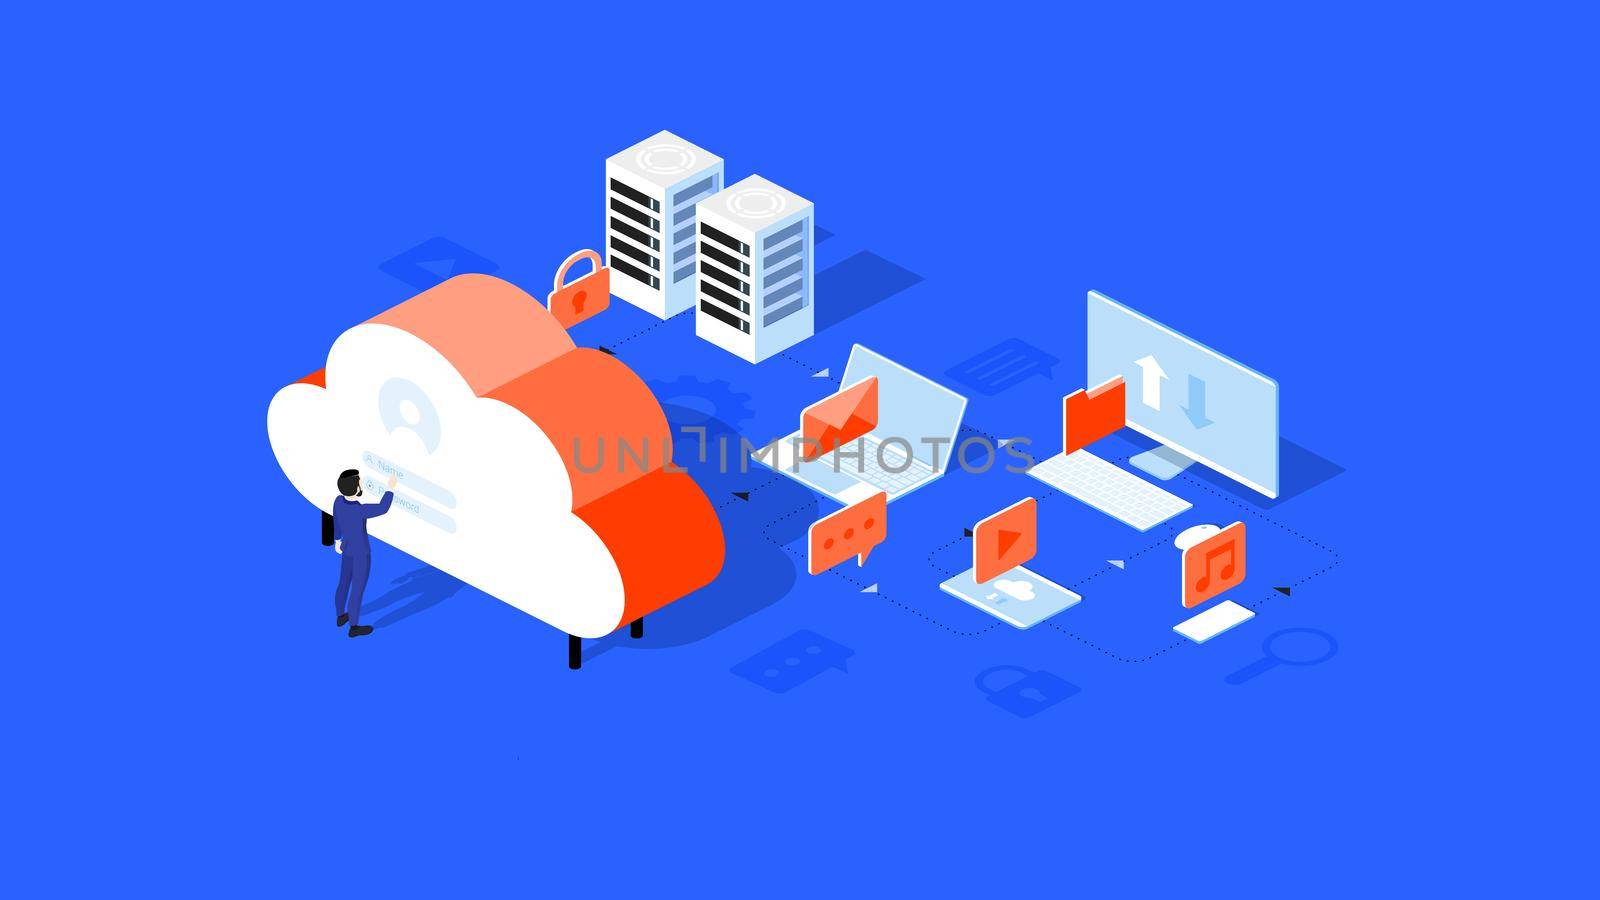 Infographic vector cloud hosting illustration. Connected devices share files music emails videos. Computer laptop tablet smartphone connected to abstract cloud. Businessman logs in.